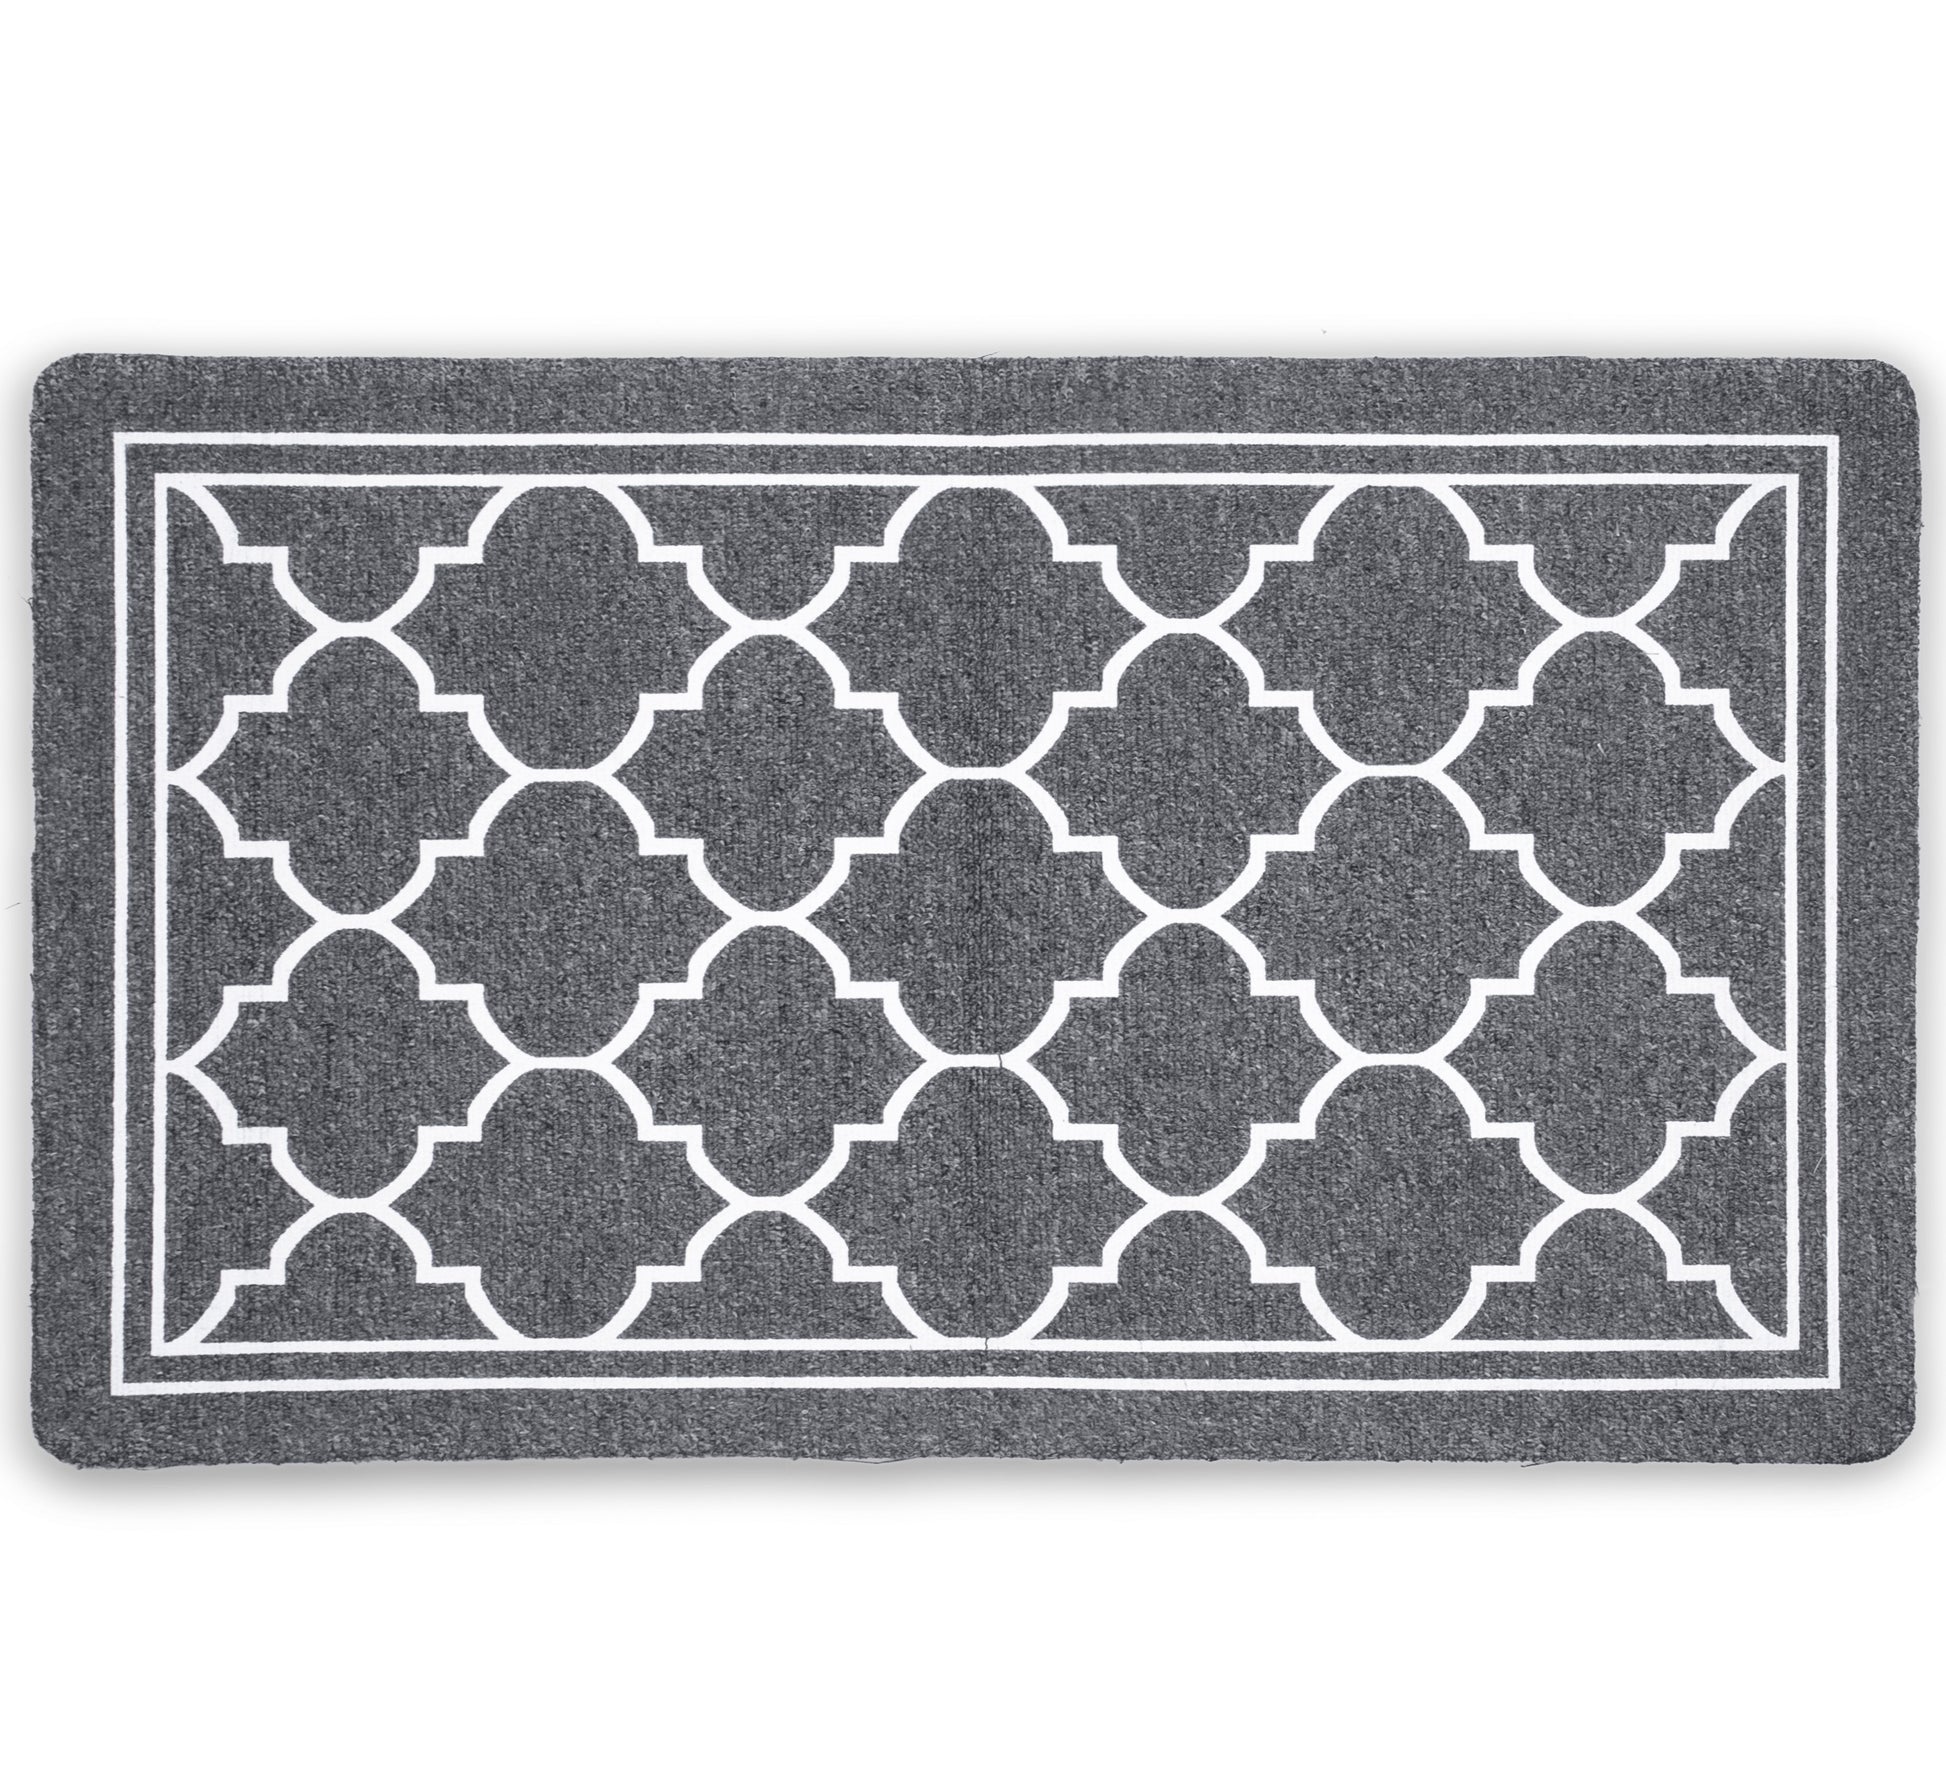 Slonser Extra Durable Door Mats For Outside Entry 18X30 Dirt Trapping  Outdoor Welcome Mats, Non-Slip Rubber Outdoor Door Mats, Low Profi